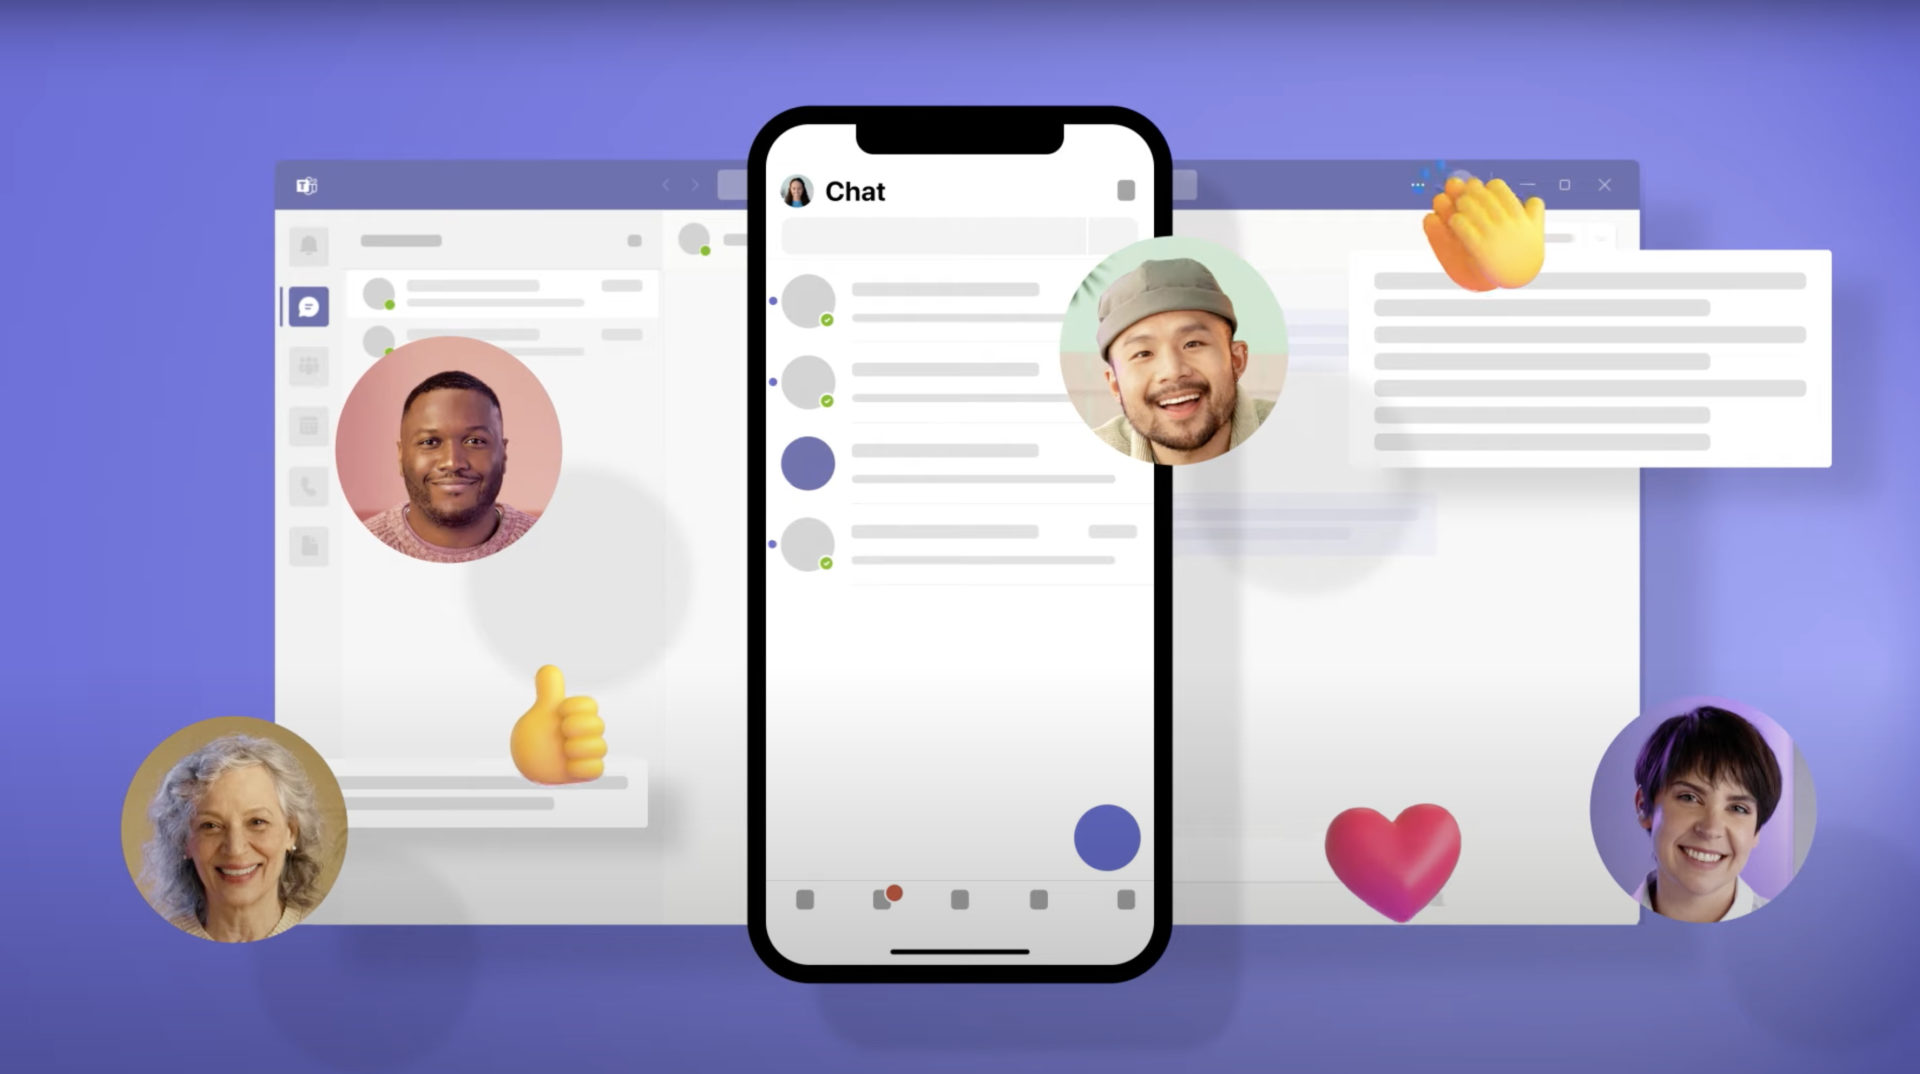 Microsoft Teams graphics on mobile and desktop on a purple background with large emojis and people smiling